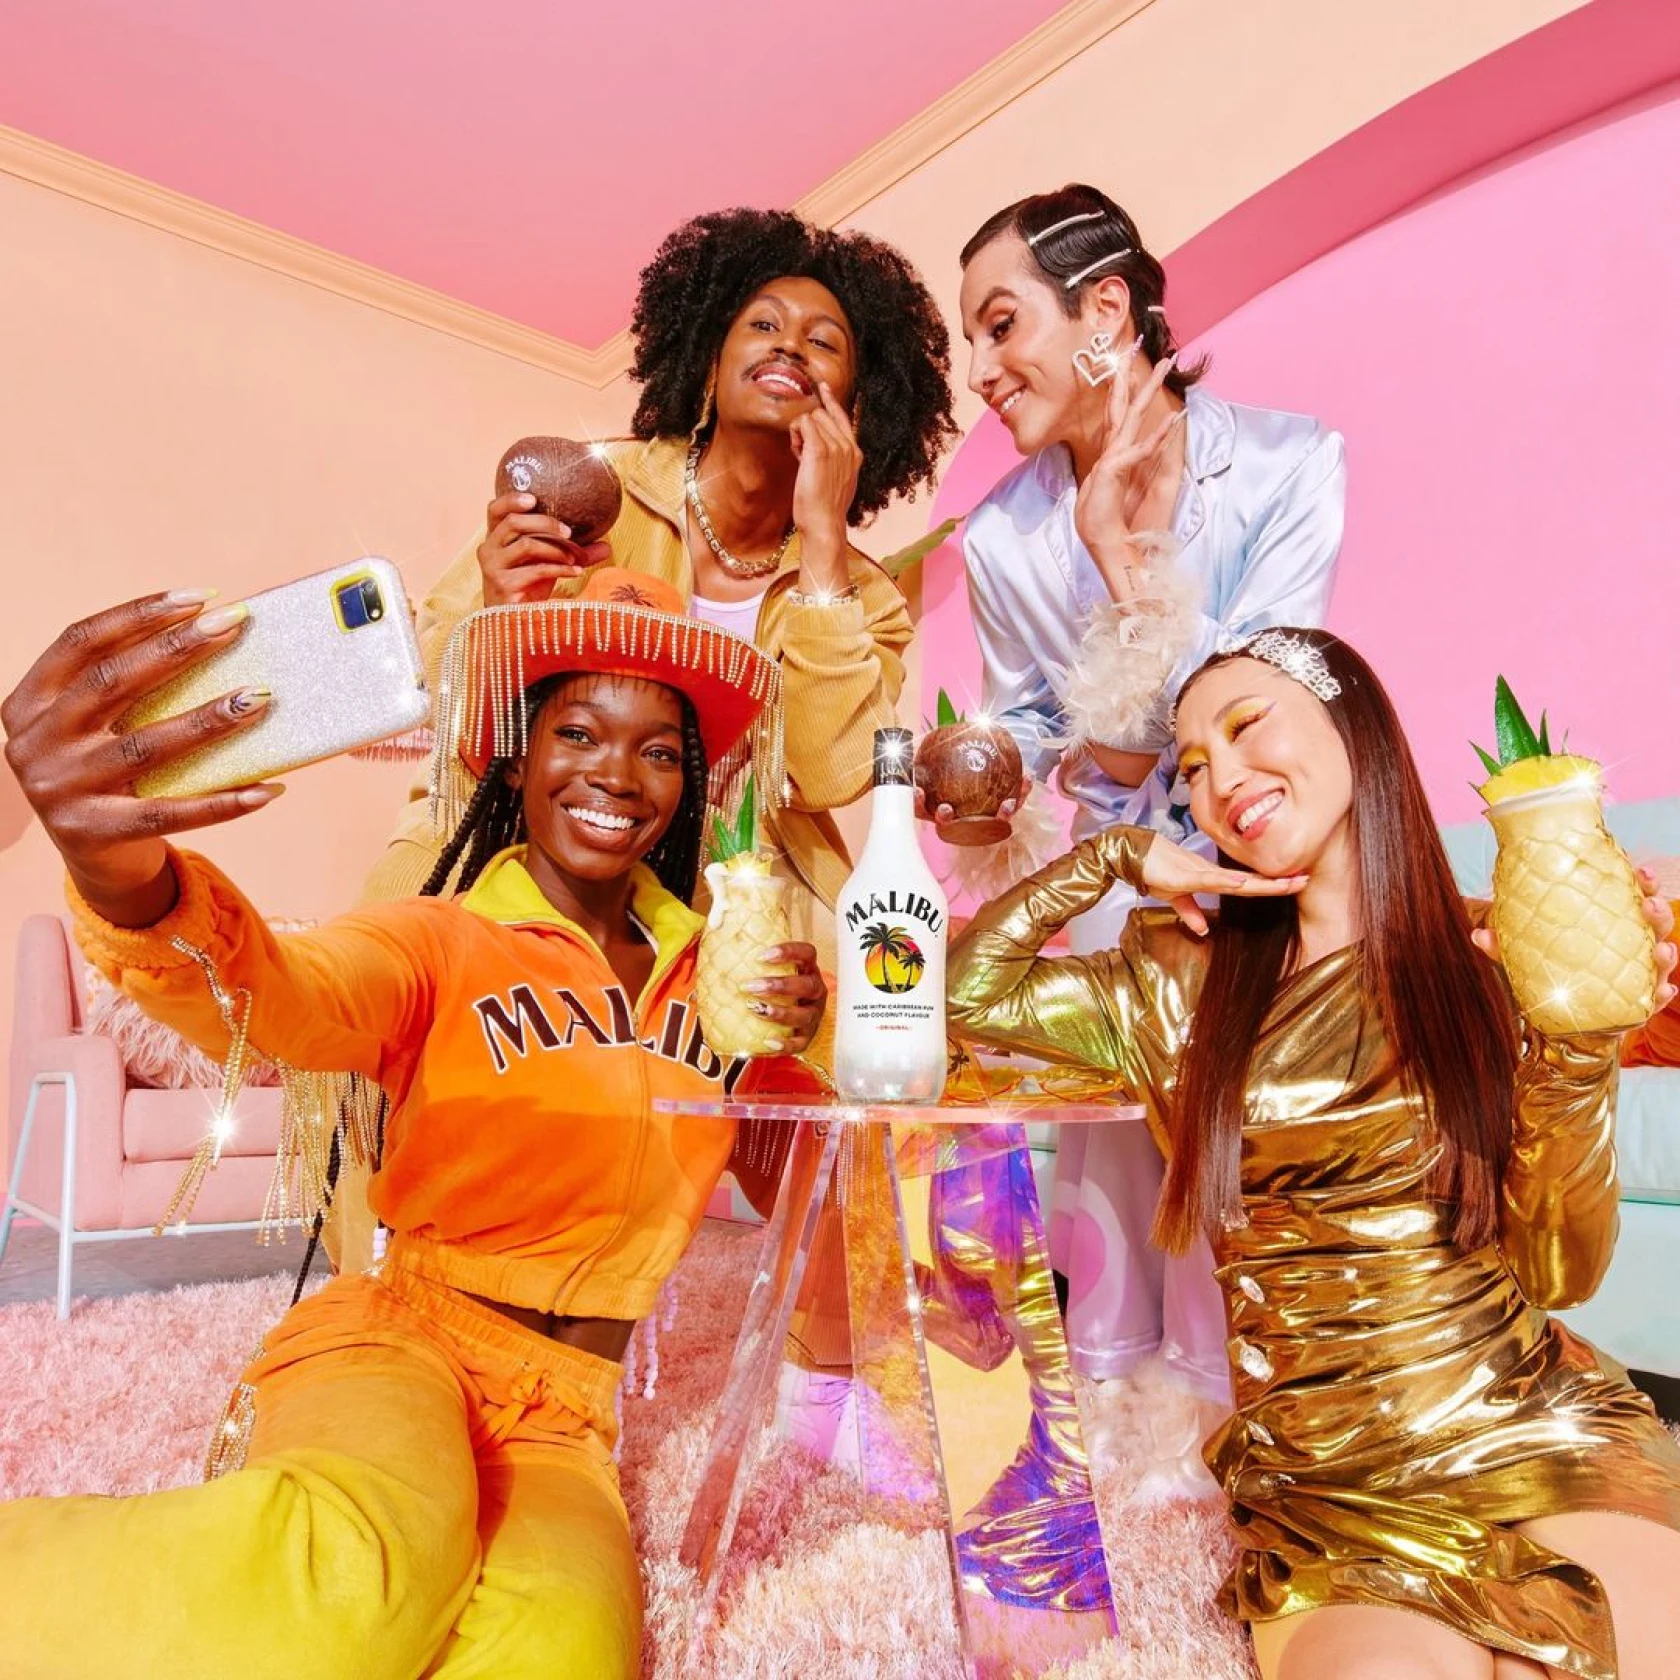 Group of diverse friends in colorful clothing and room, taking selfie around Malibu drink